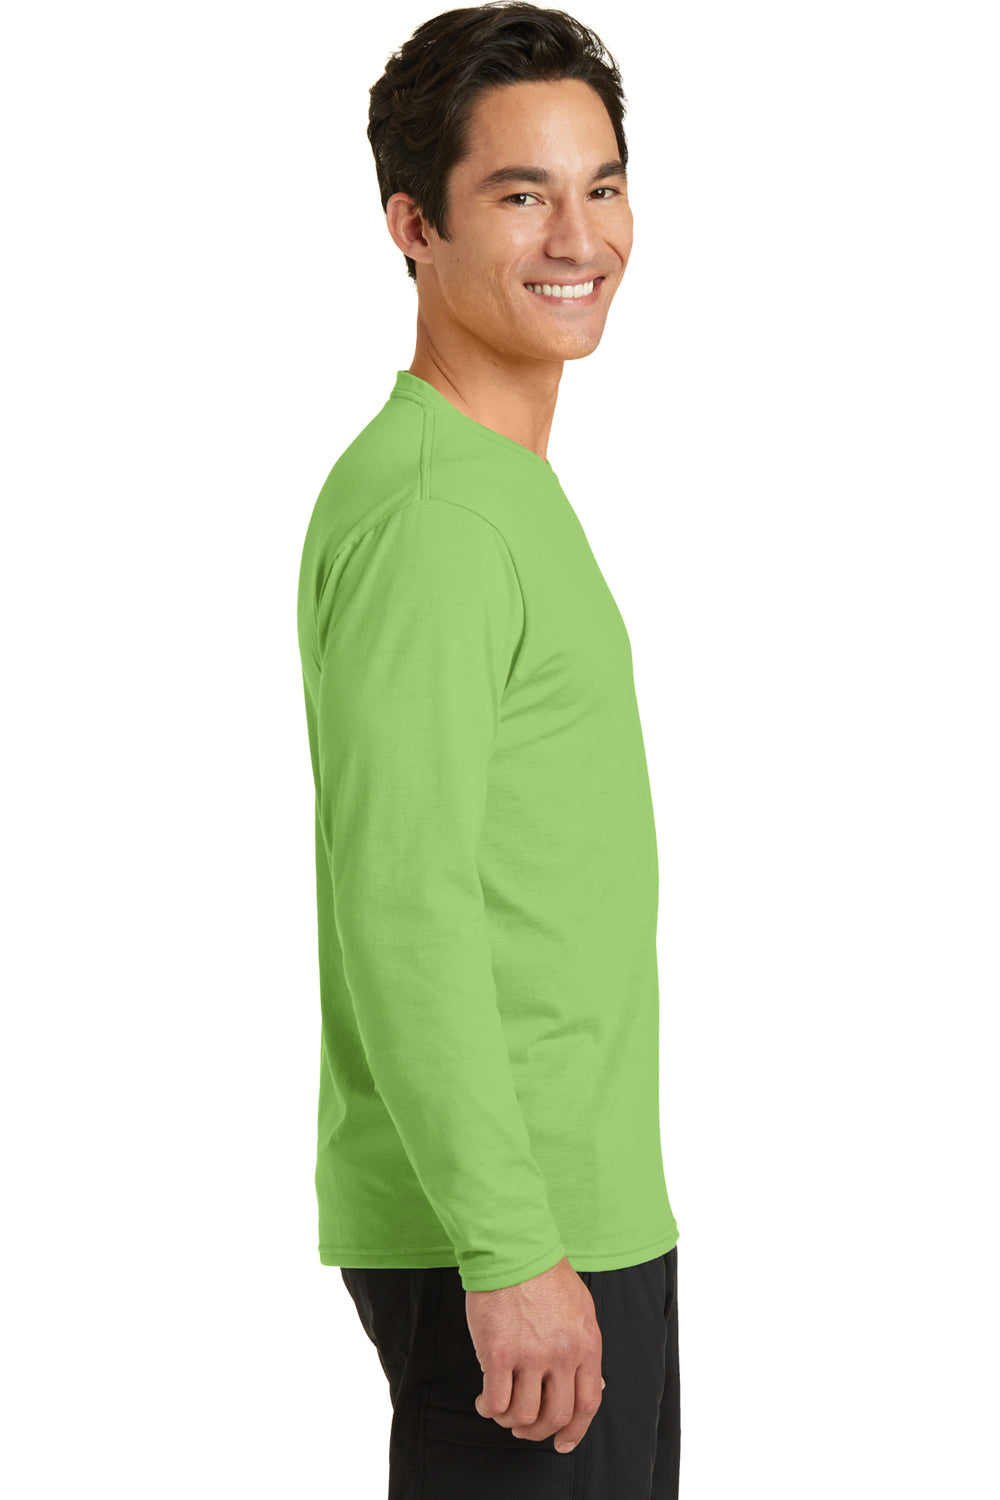 Port & Company PC381LS Mens Dry Zone Performance Moisture Wicking Long Sleeve Crewneck T-Shirt Lime Green Side